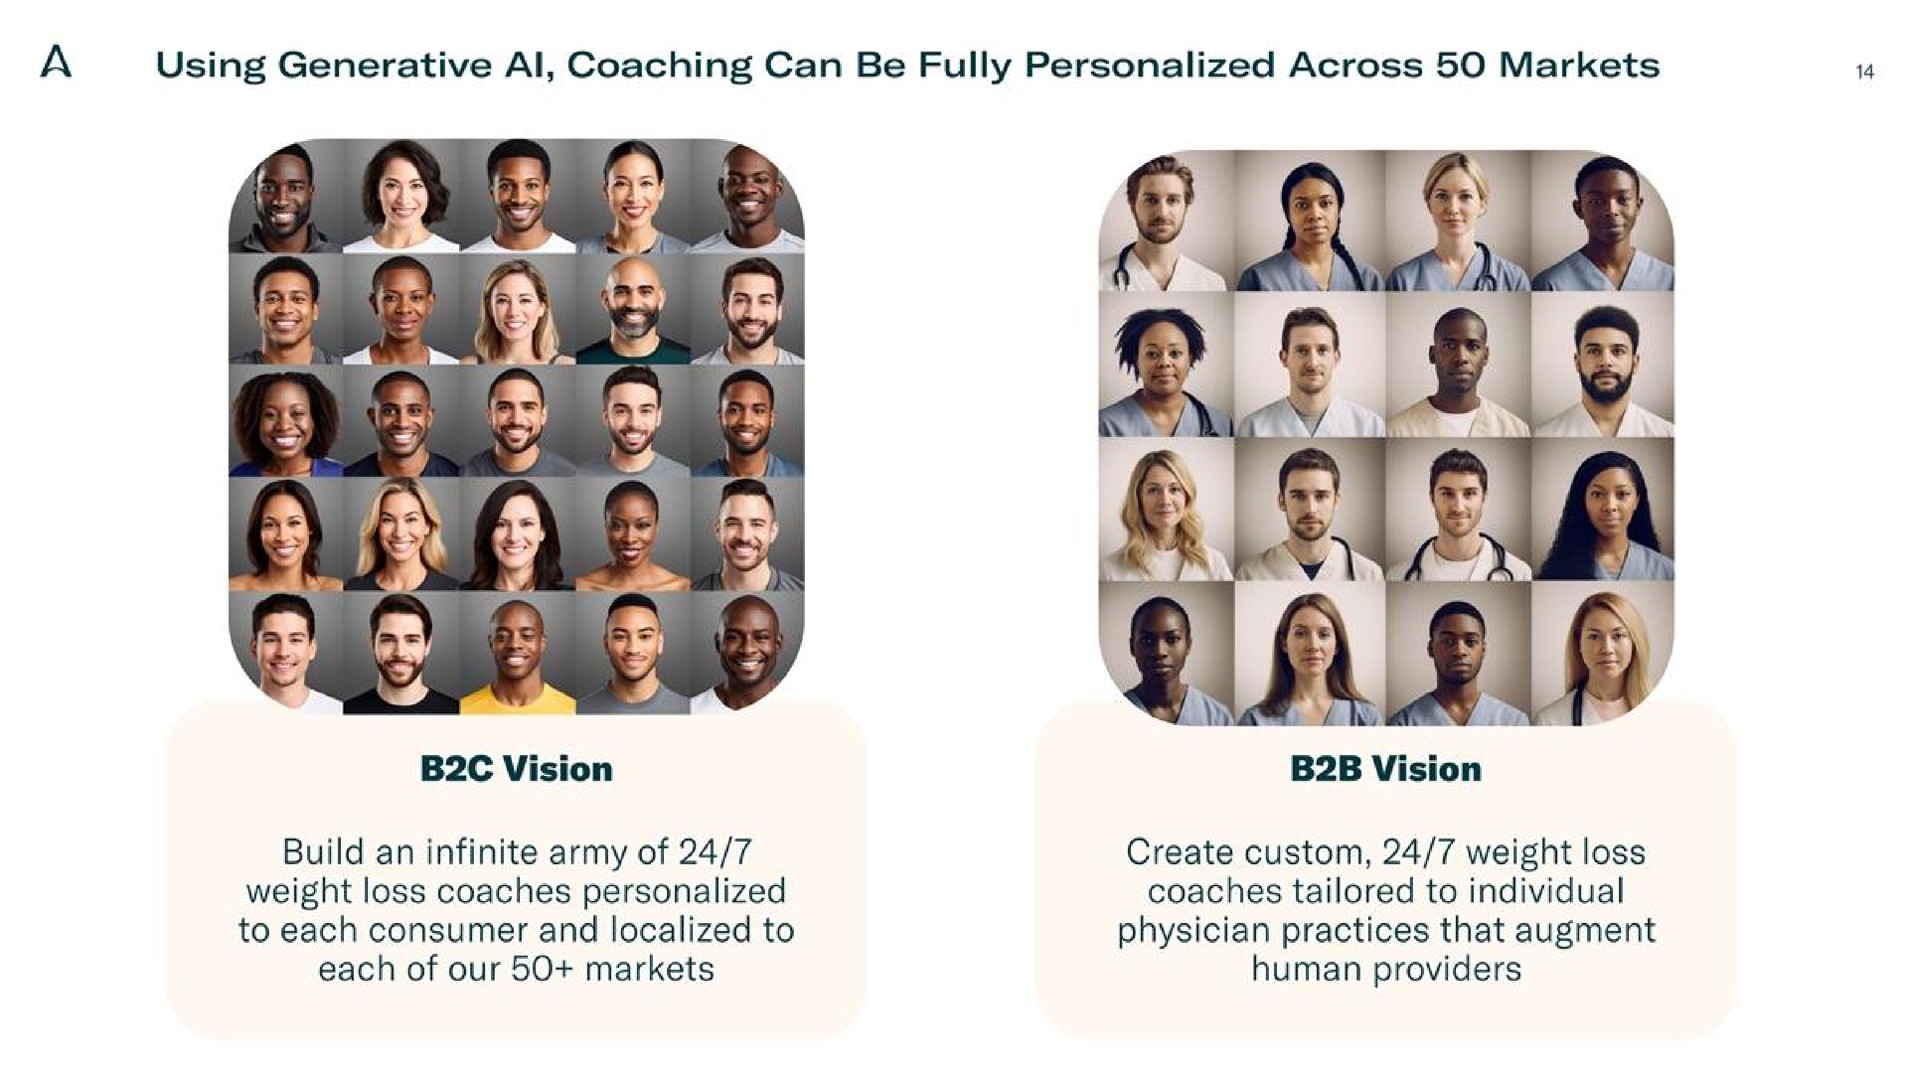 a using generative coaching can be fully personalized across markets | Allurion